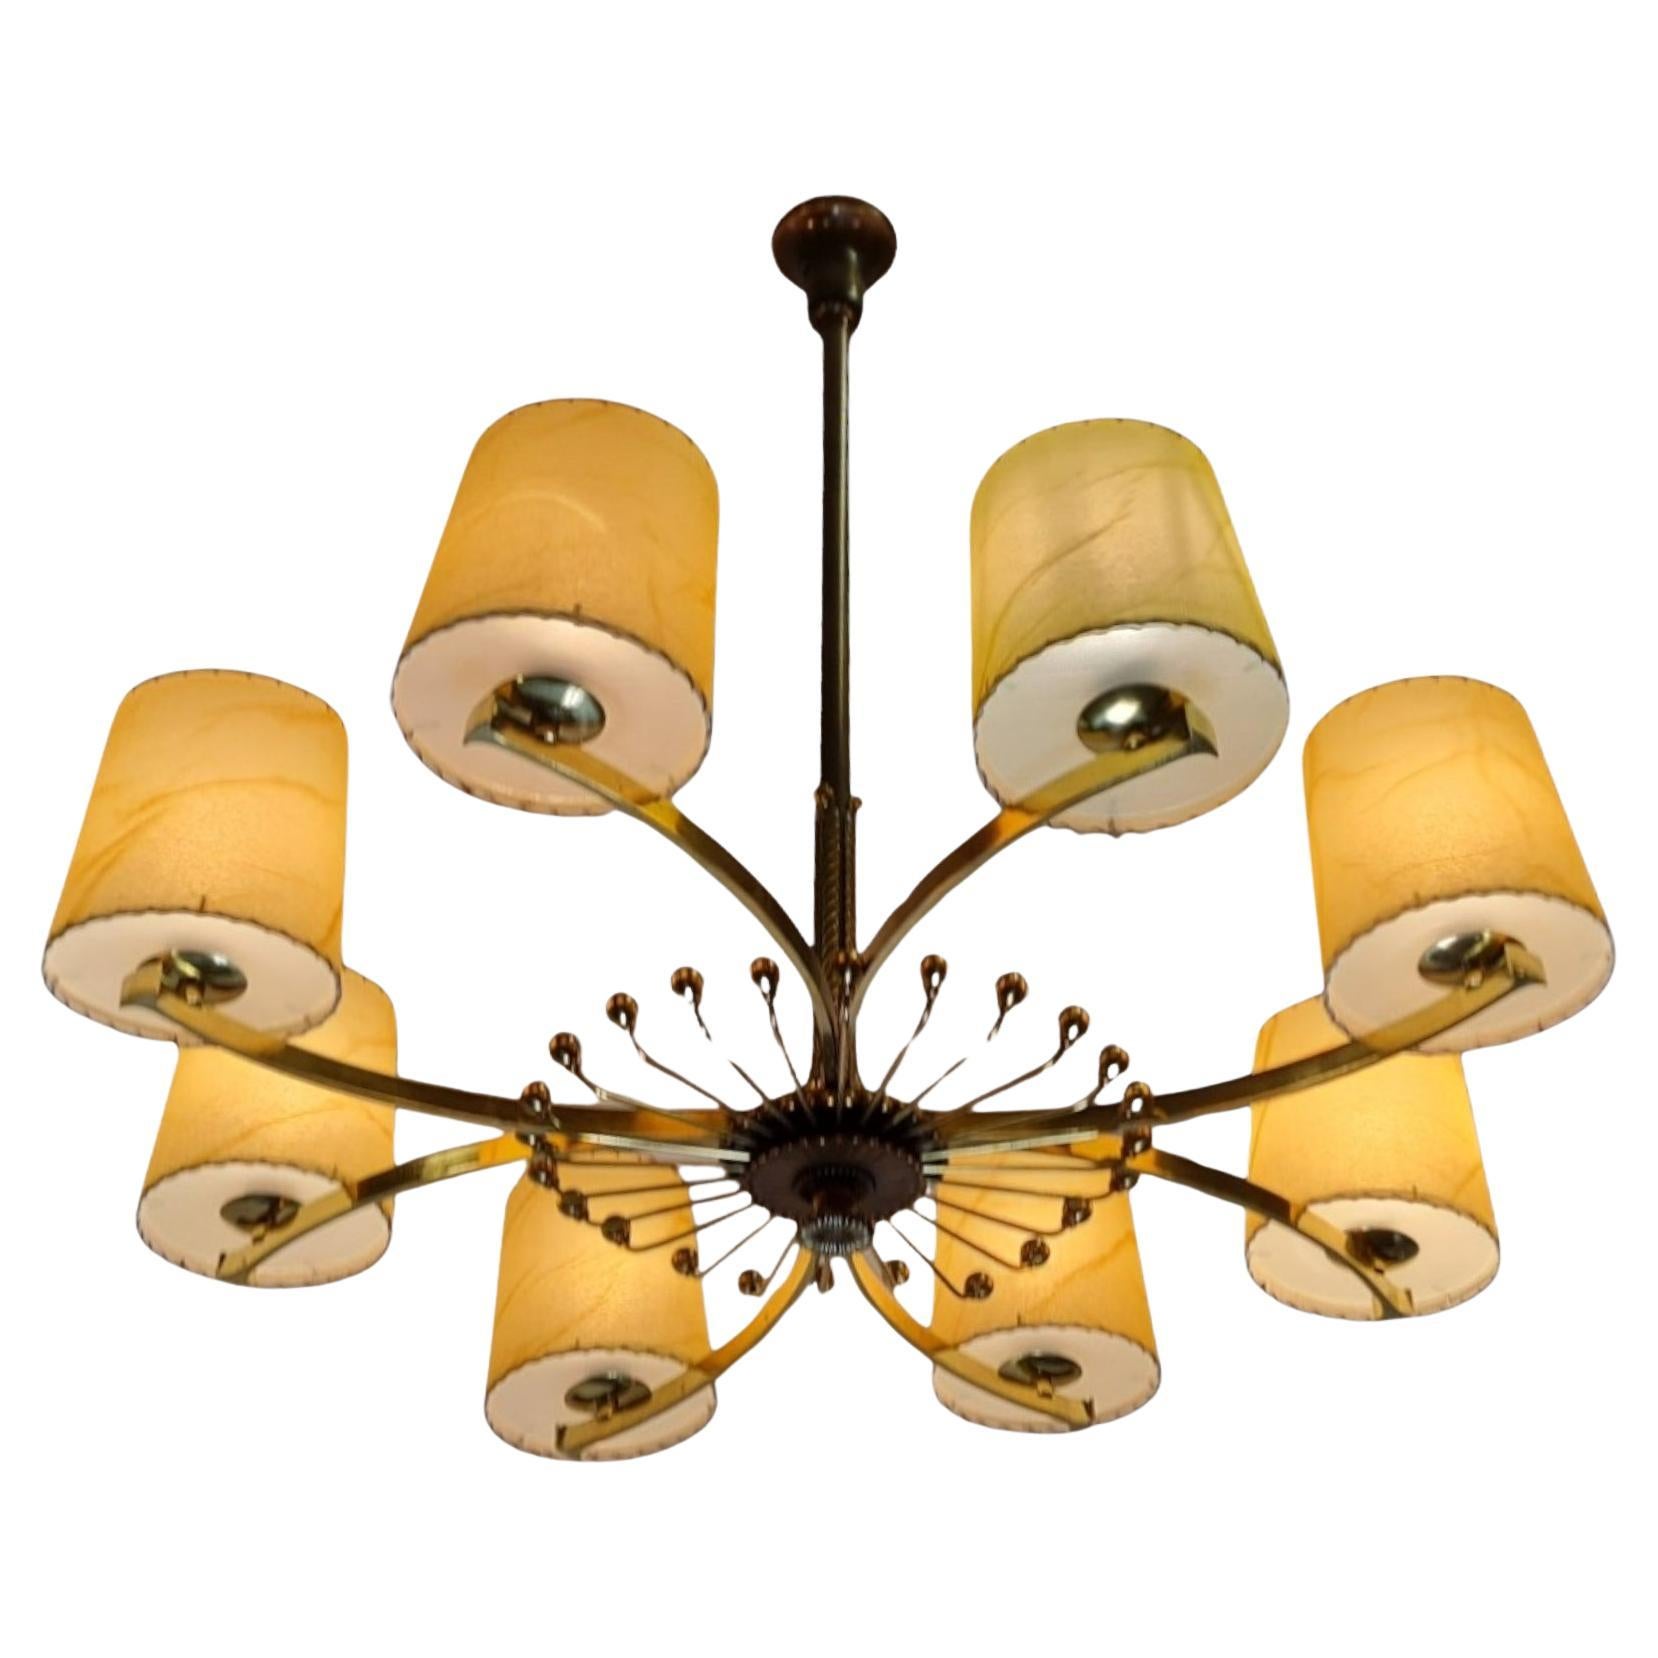 Paavo Tynell Commissioned Ceiling Lamp, Taito Oy 1930s For Sale